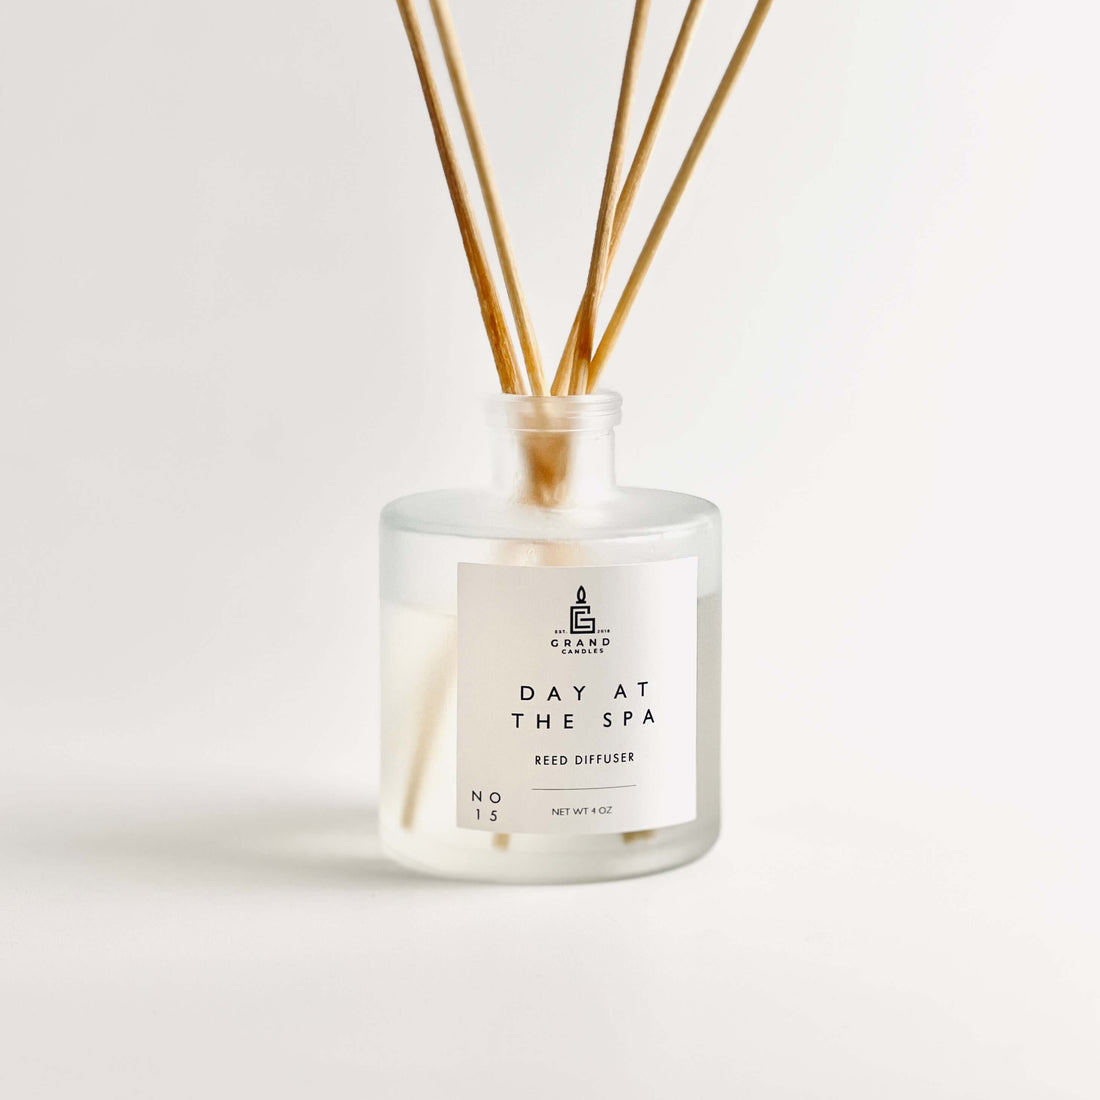 Day at The Spa Reed Diffuser